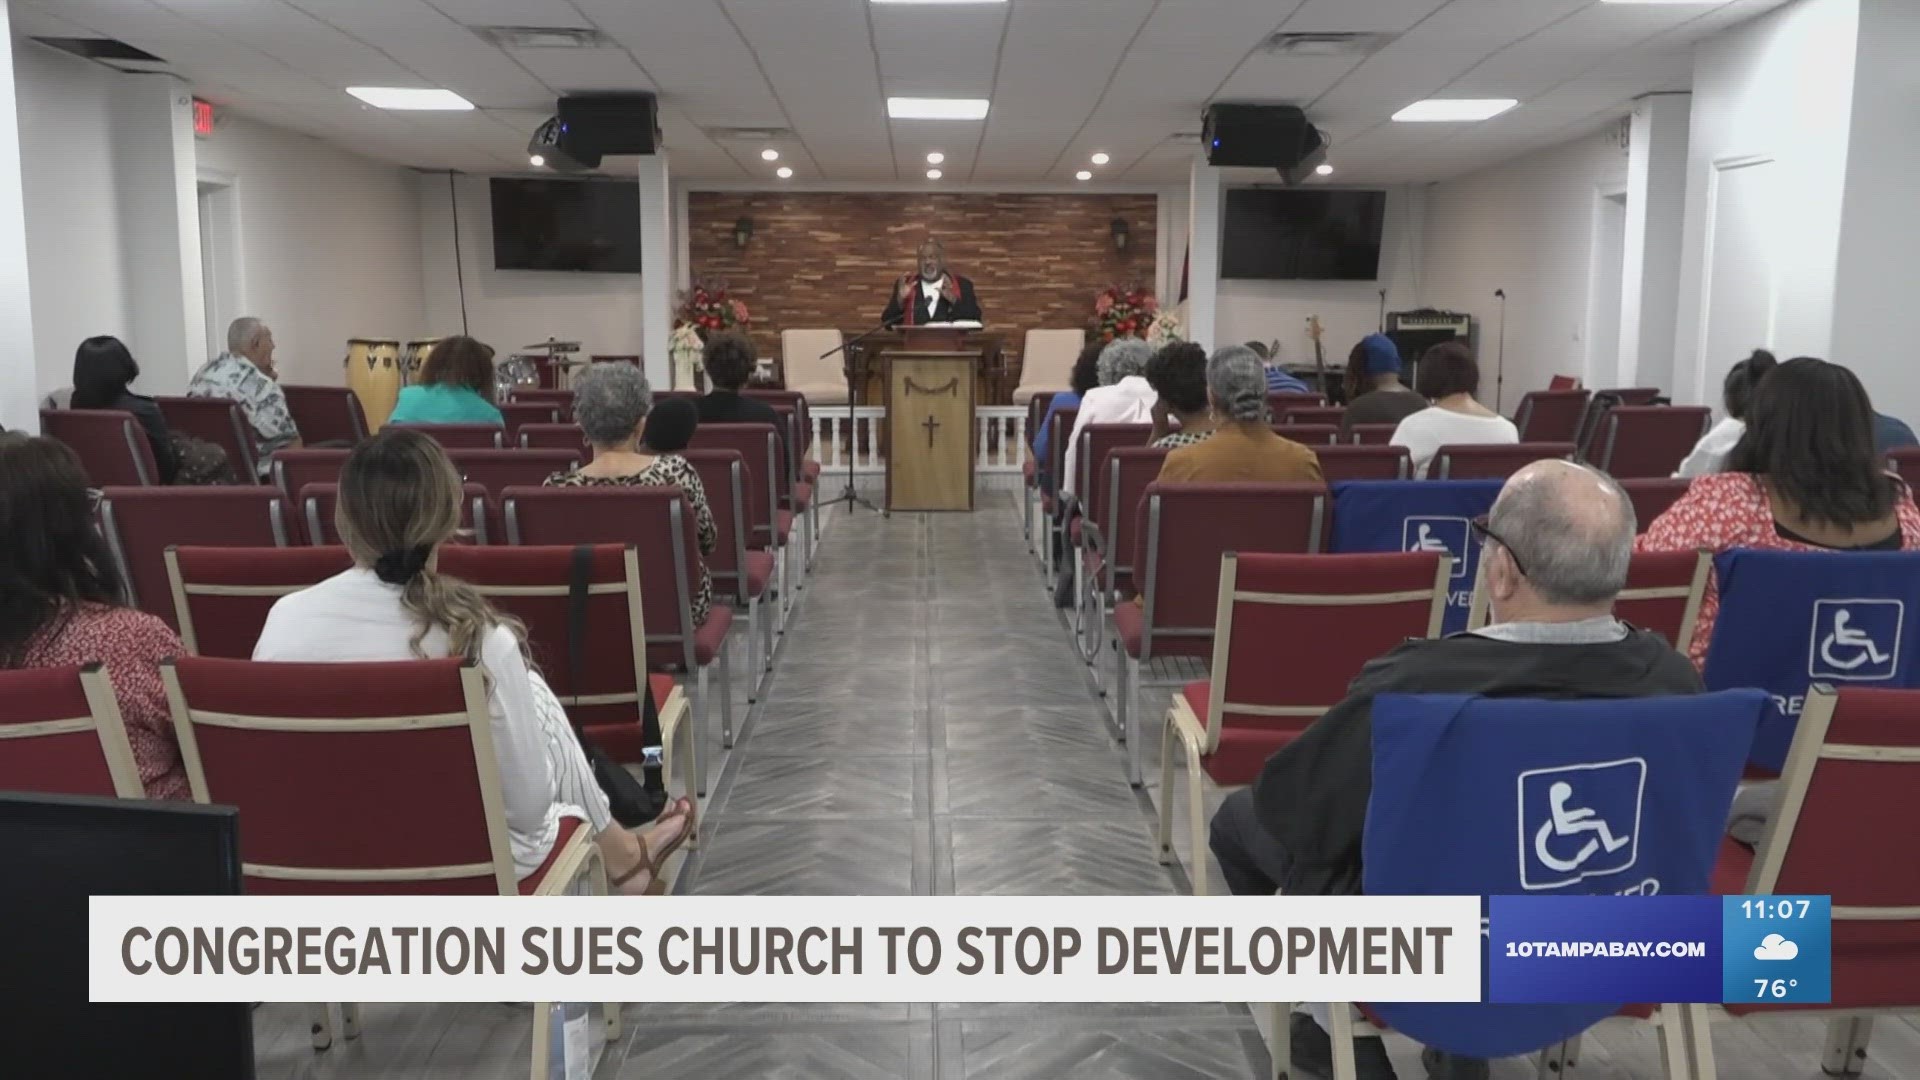 Former members of Bell Shoals Baptist Church Palm River Campus were ready to move on. Then they heard about plans to sell the church to developers.